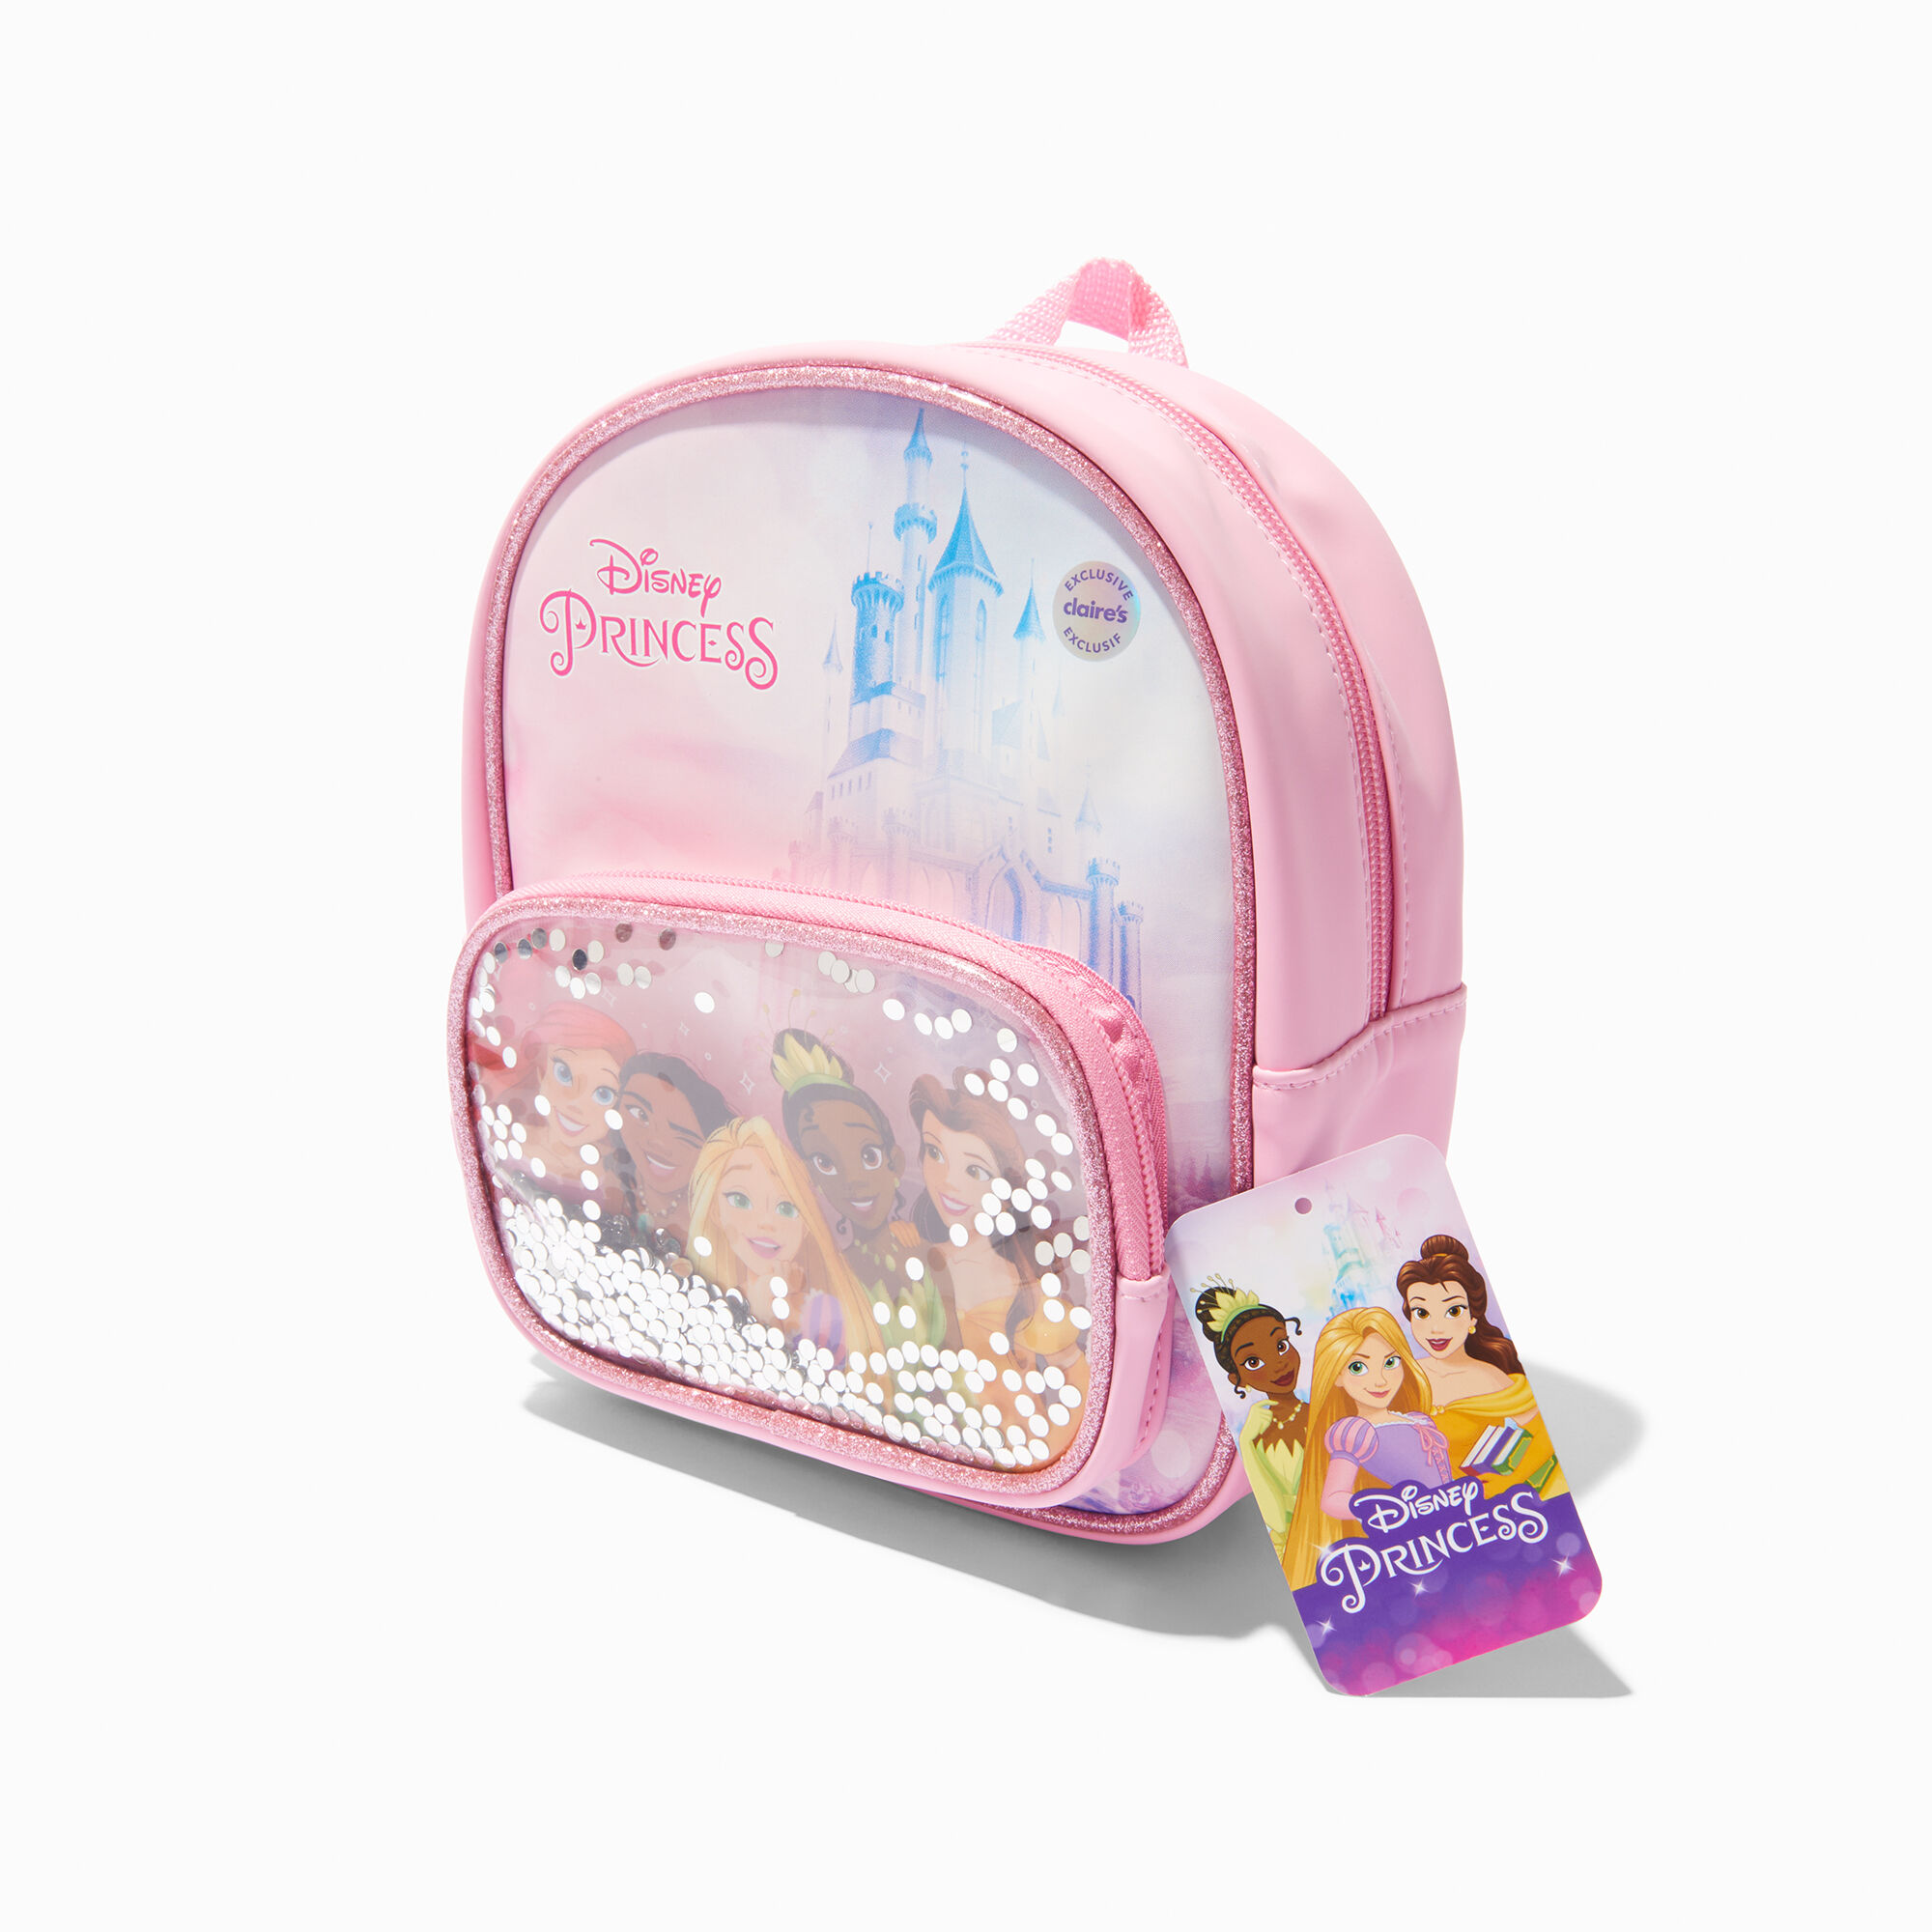 claire's exclusive ©disney princess sequin backpack - pink